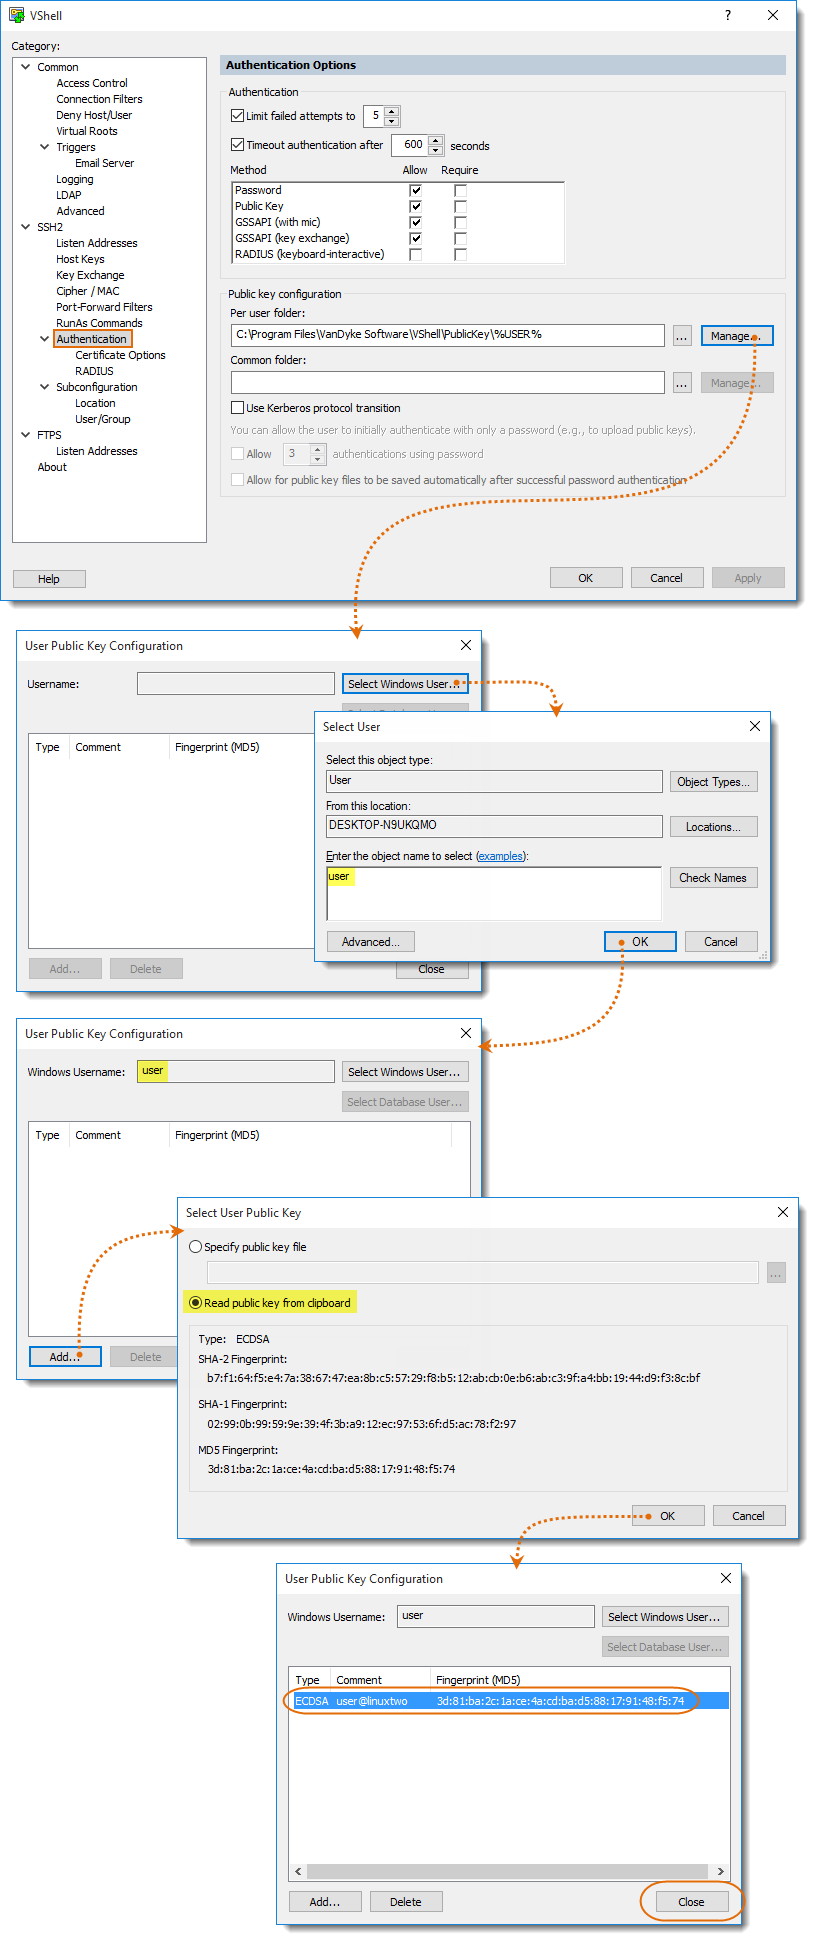 Graphic showing how to use the VShell control panel to configure your account to allow public-key authentication for your username.